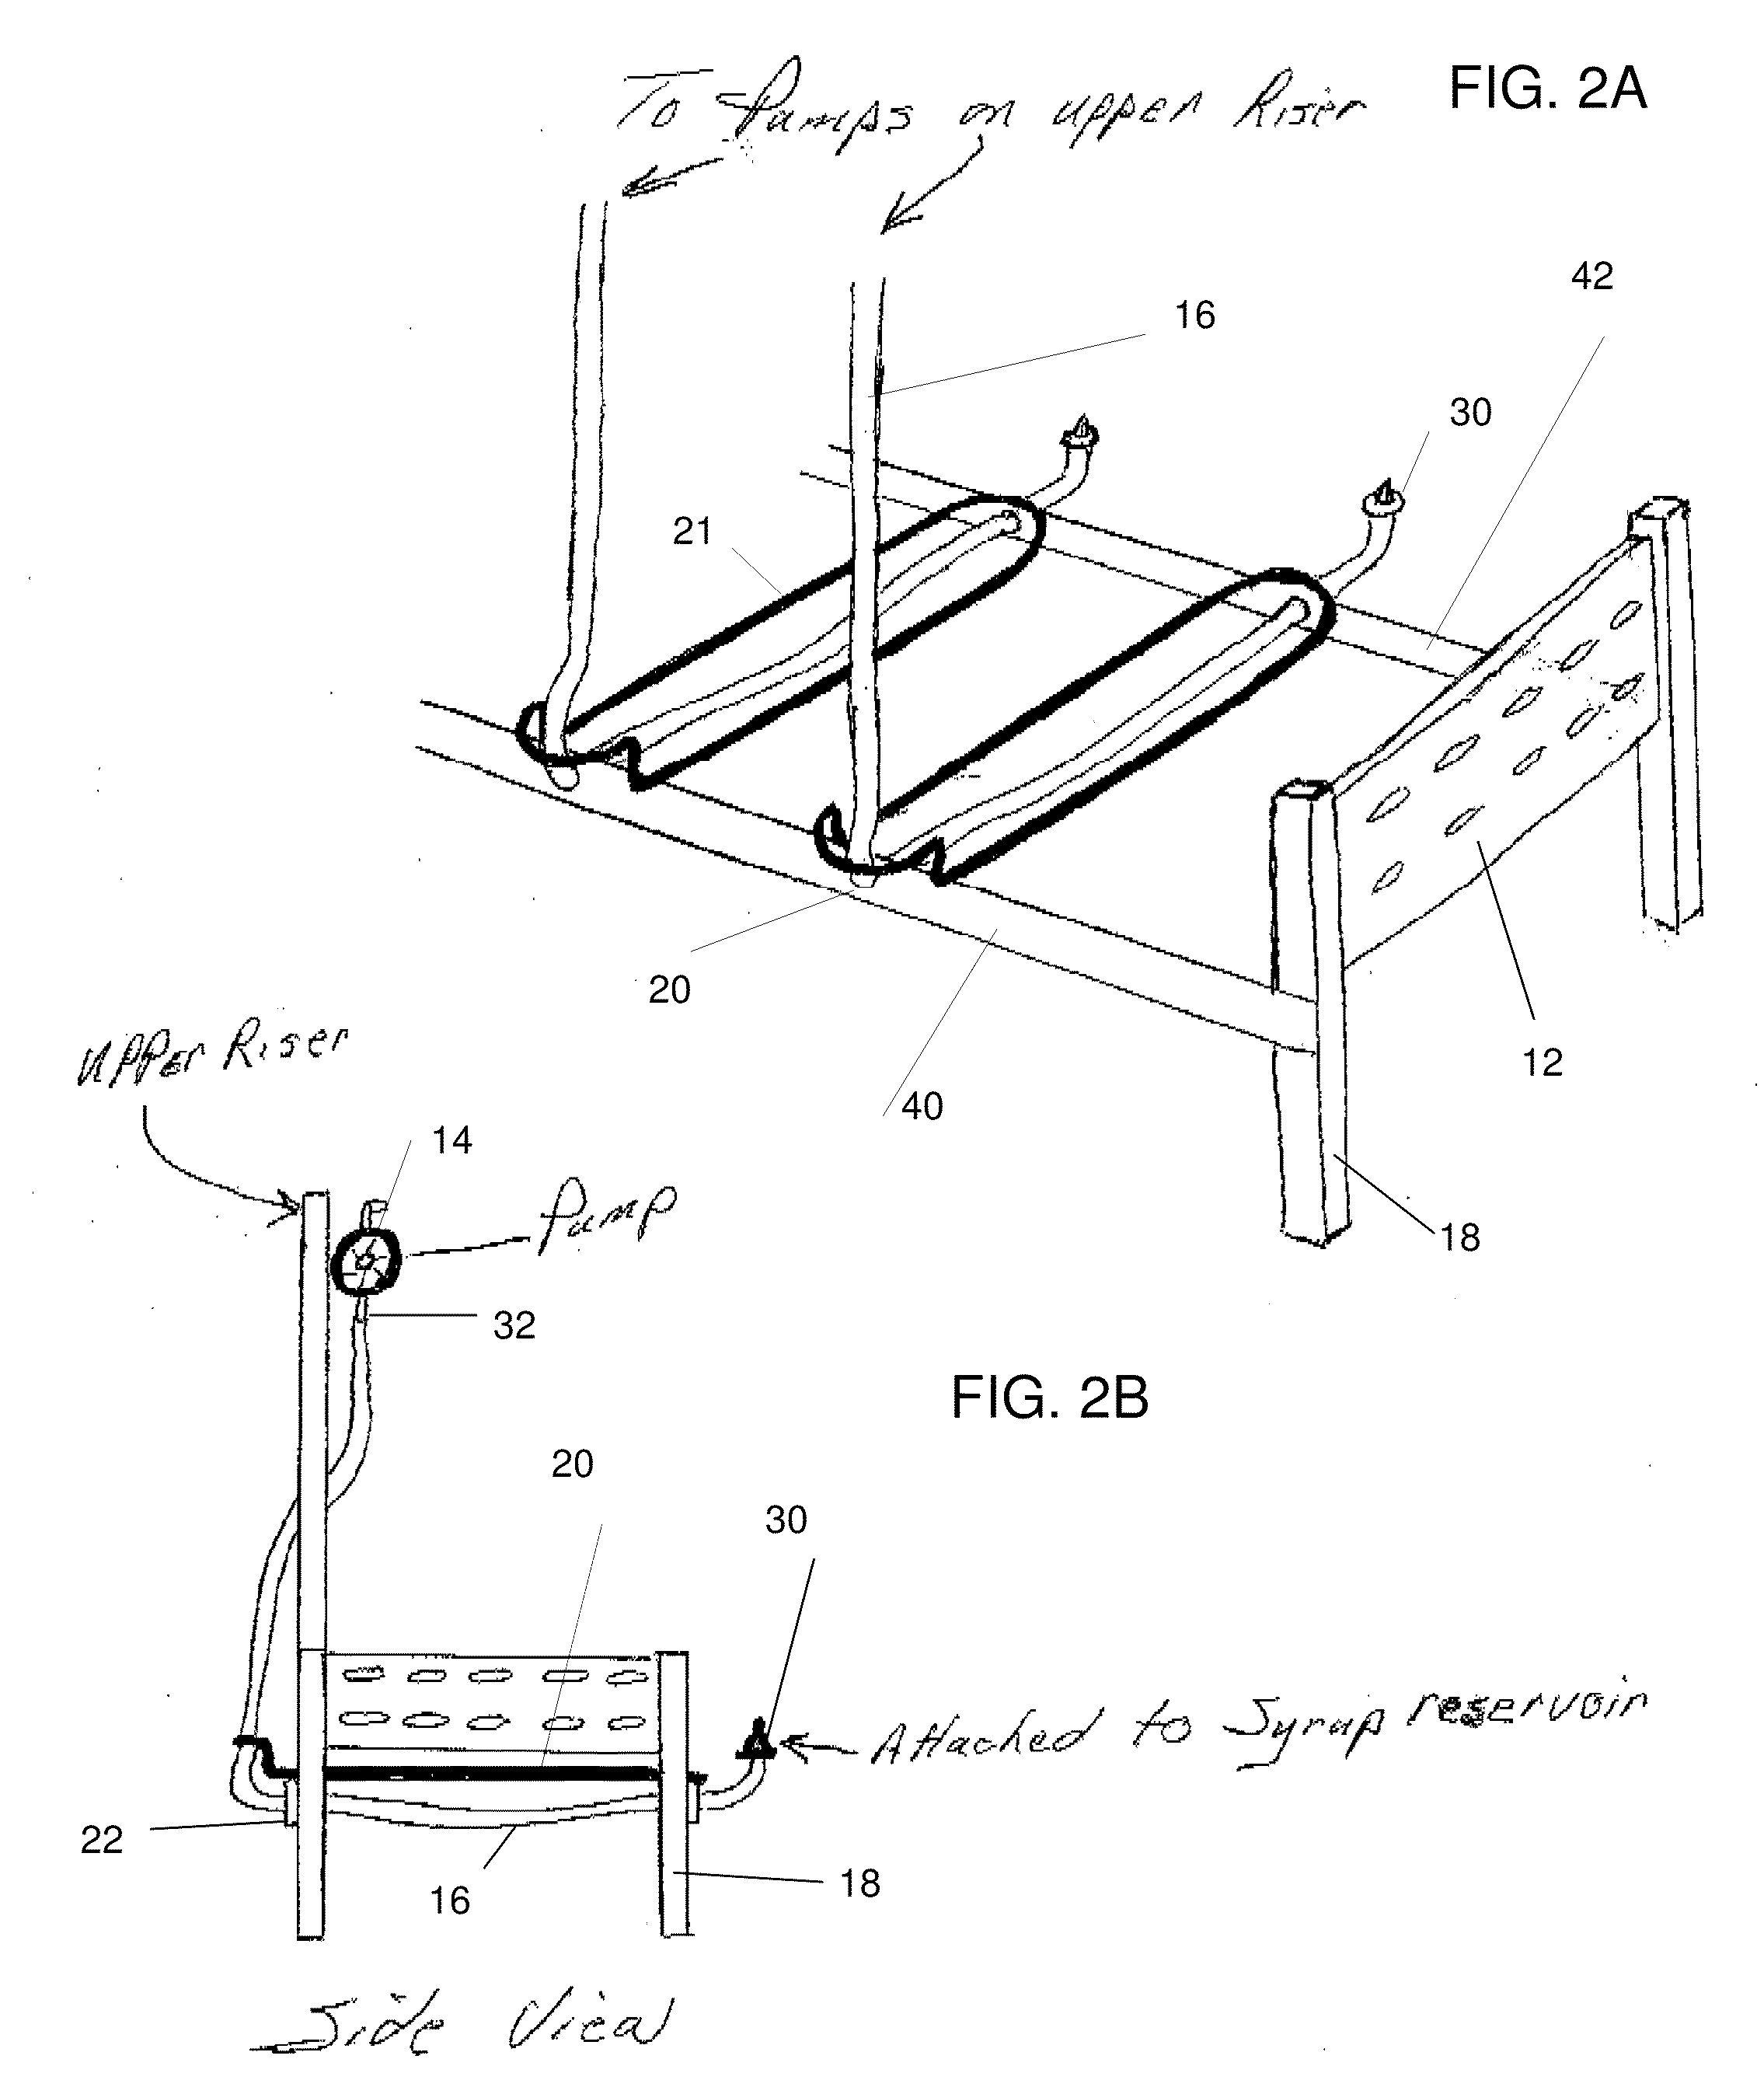 Comestible fluid rack with conduit routing system